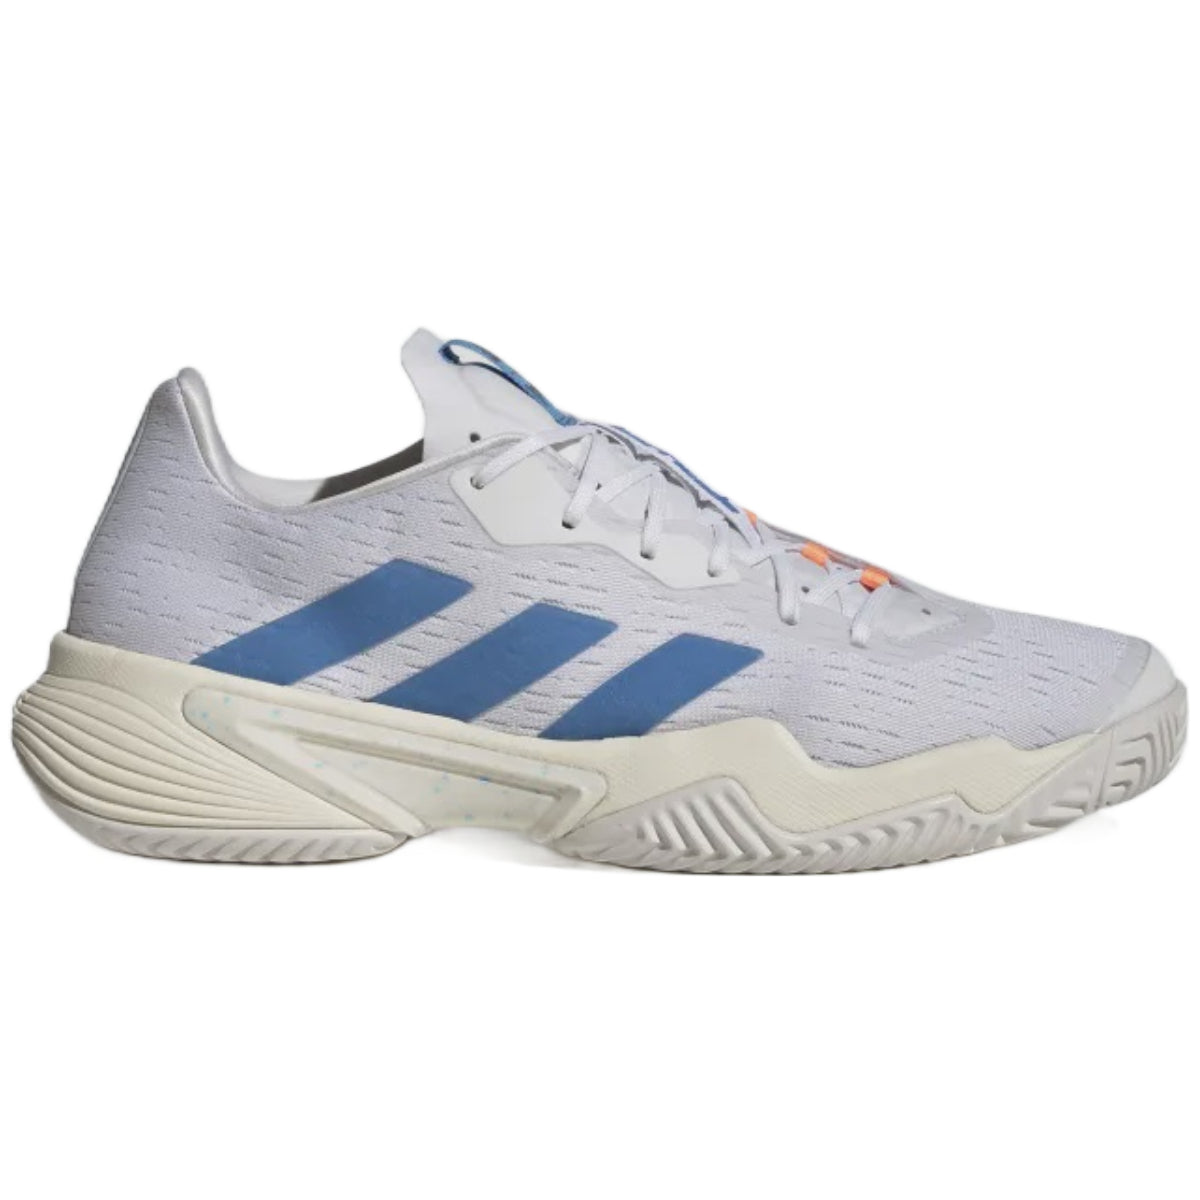 Adidas Barricade M Parley-GY1369 – All About Tennis